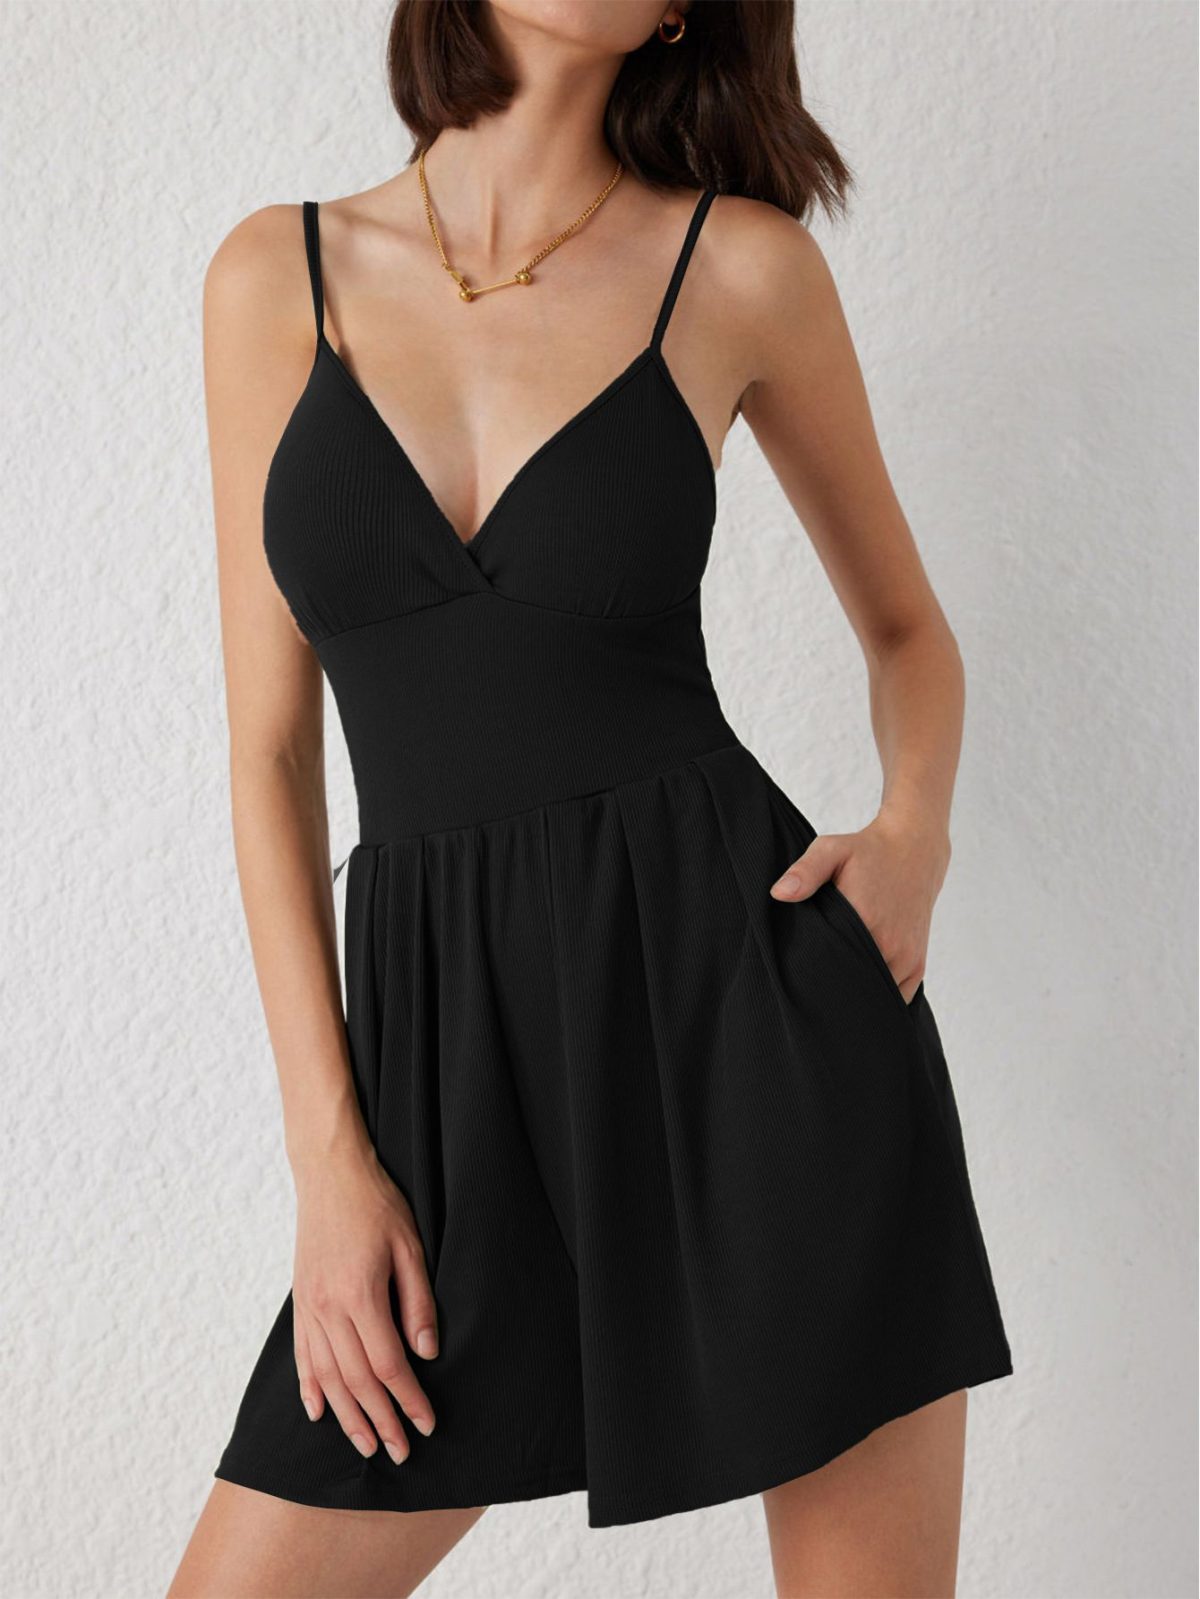 Sexy Deep V Plunge Small Sling Waist Slimming Dress in Dresses